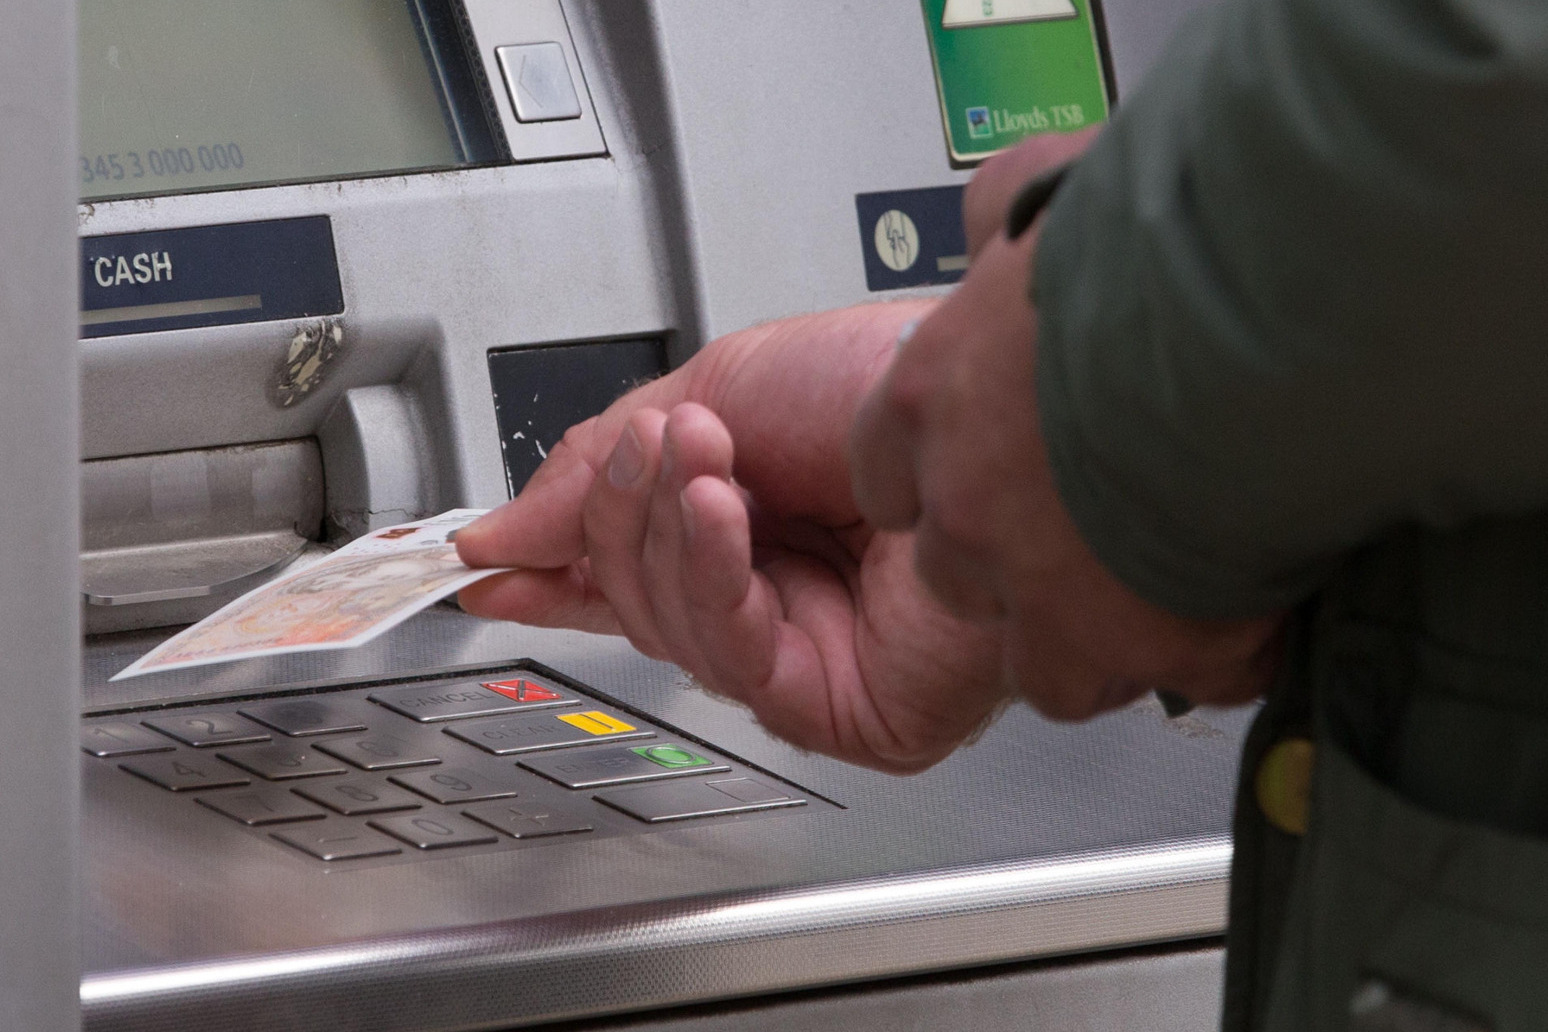 Locations where ATM withdrawals have declined most sharply in pandemic revealed 